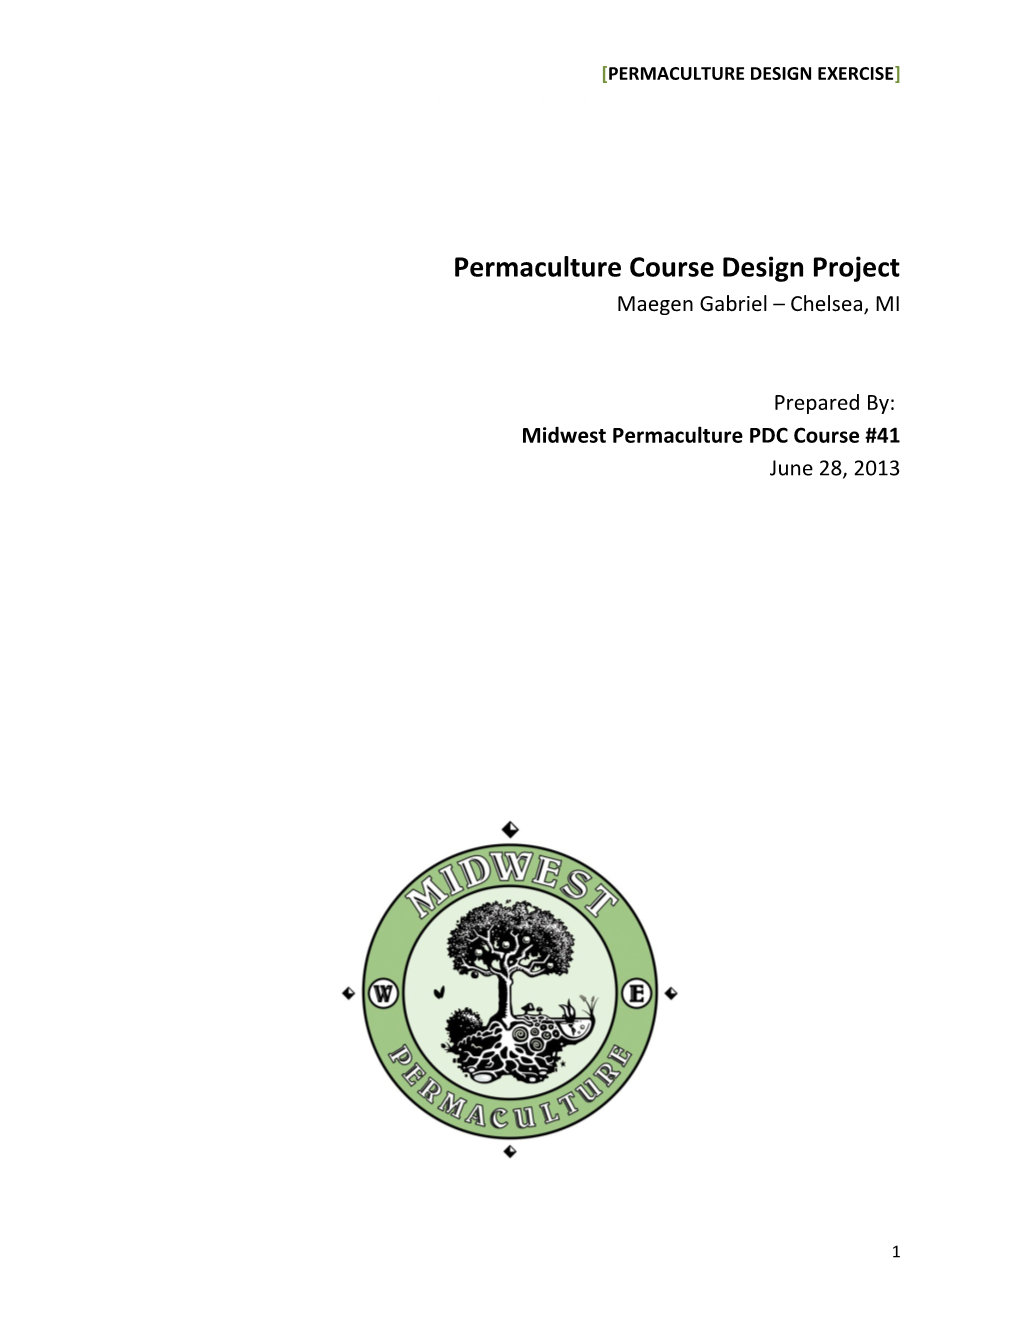 Permaculture Design Exercise